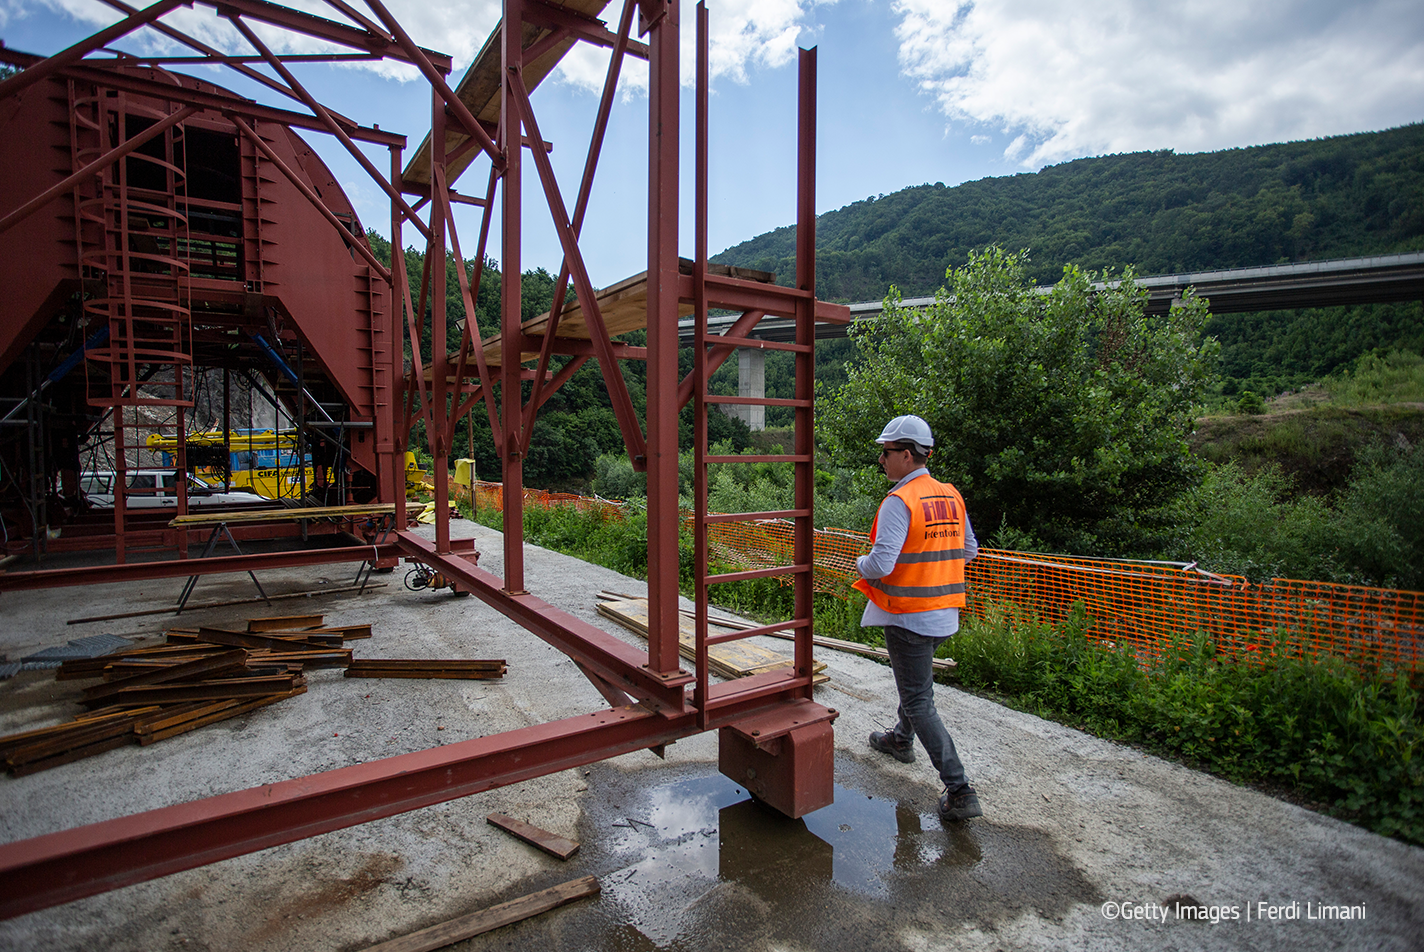 New €1.2 billion investment package for infrastructure and entrepreneurship in the Western Balkans